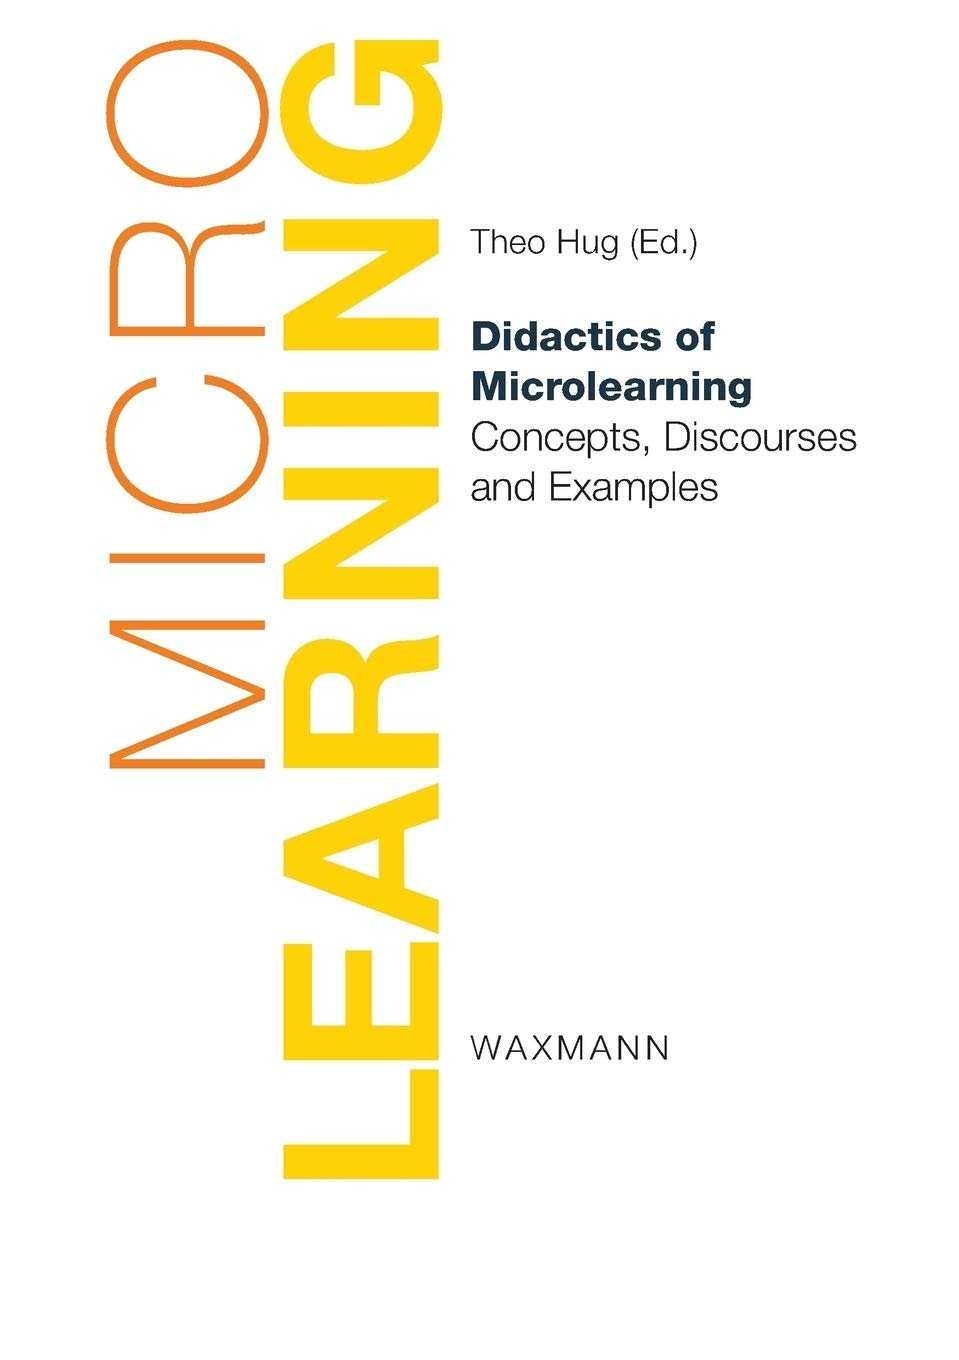 Microlearning - Didactics of Microlearning